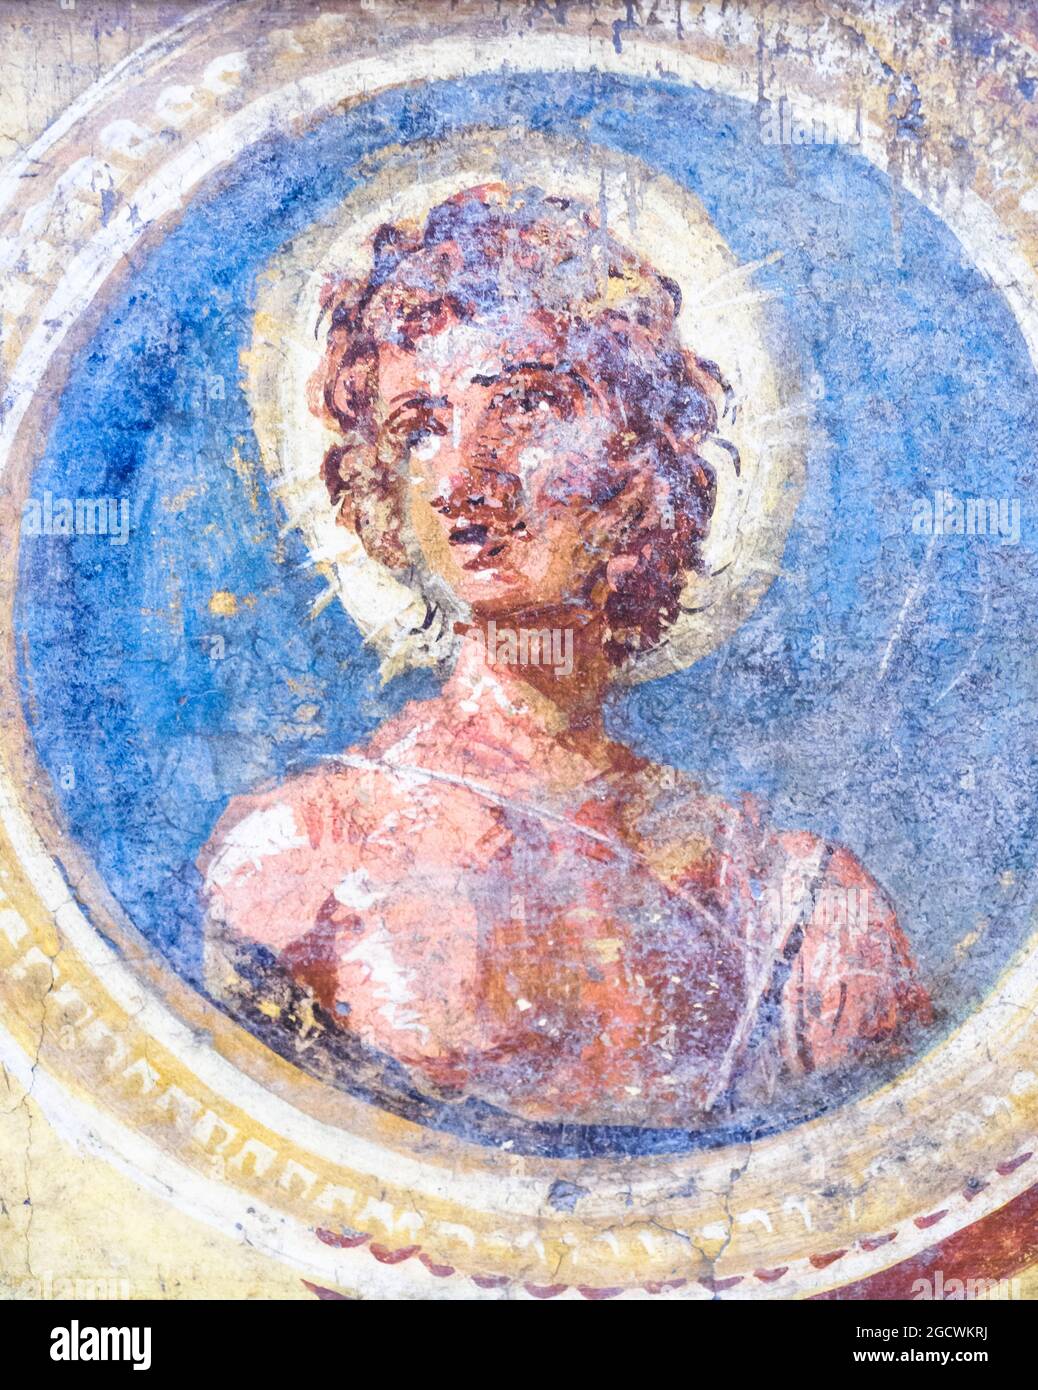 Medallion with the personification of sunday as the Sun fresco Pompeii, Insula Occidentalis 45-79 AD Stock Photo